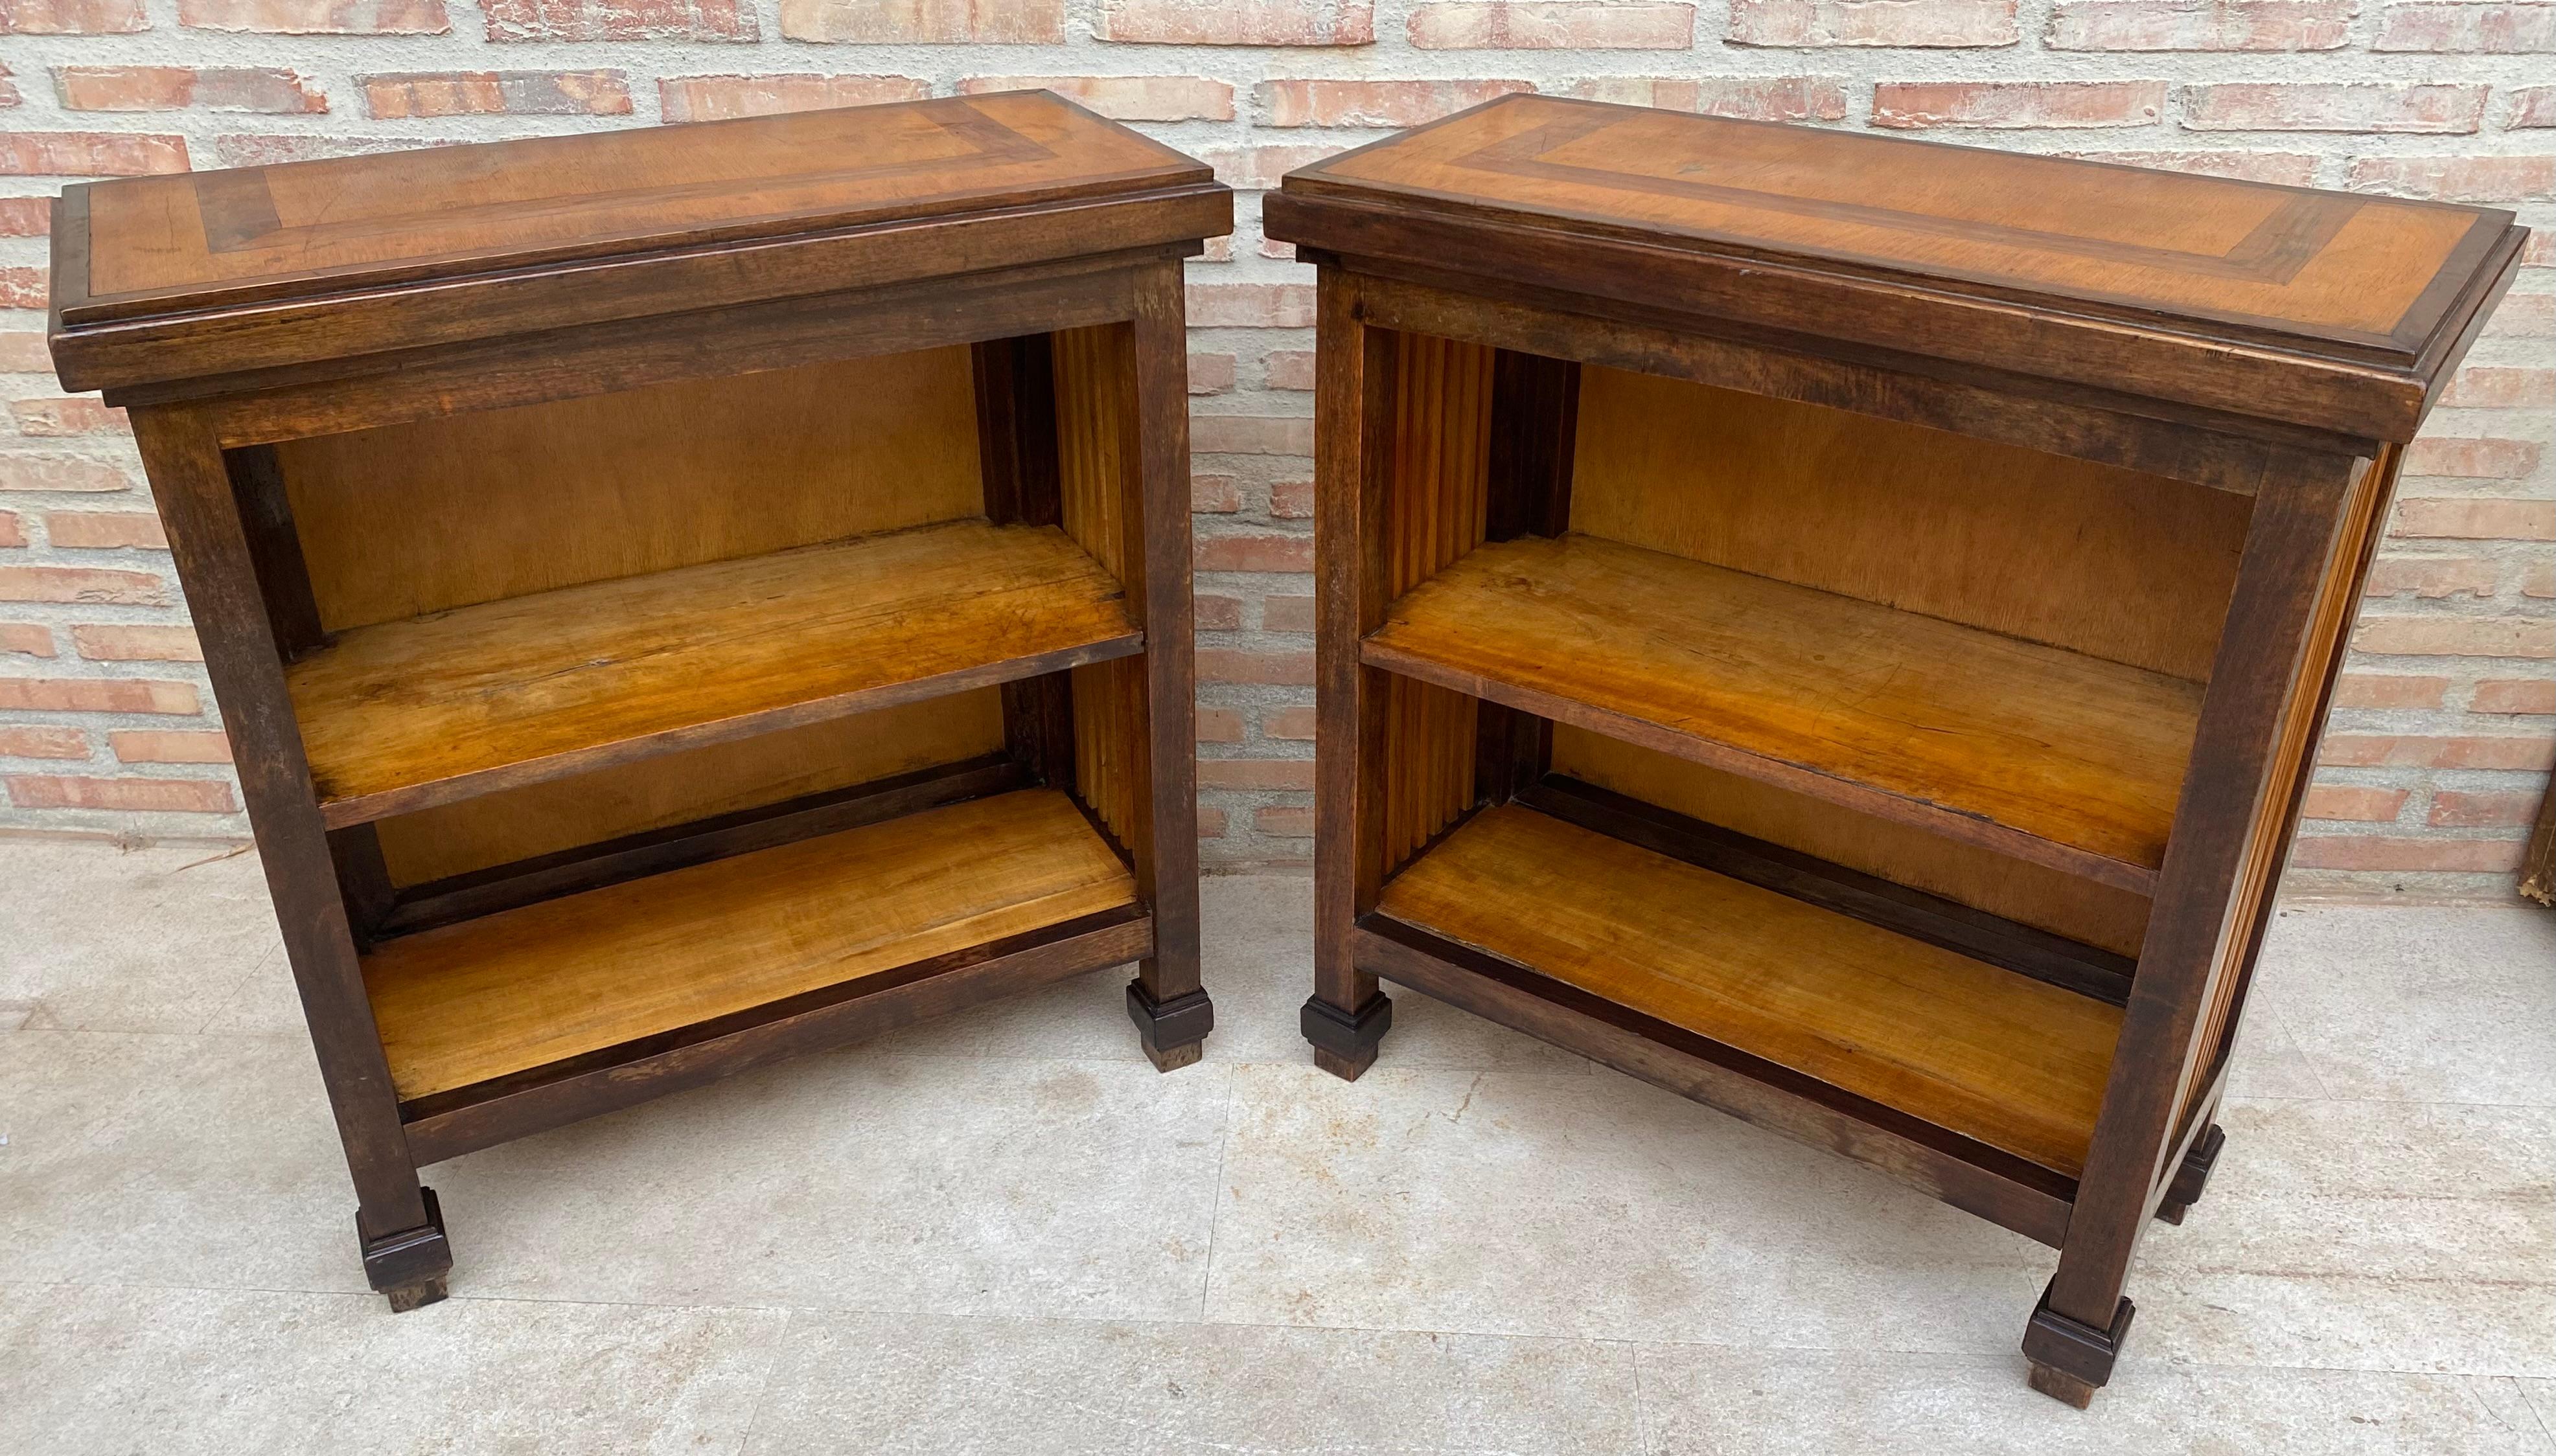 Beautiful pair of shelves-bookcases or bedside tables from the 40s. They are special for their marquetry and in the upper part, for their two shelves with capacity for a lot of reading books and their side bars.
This couple has a matching coffee